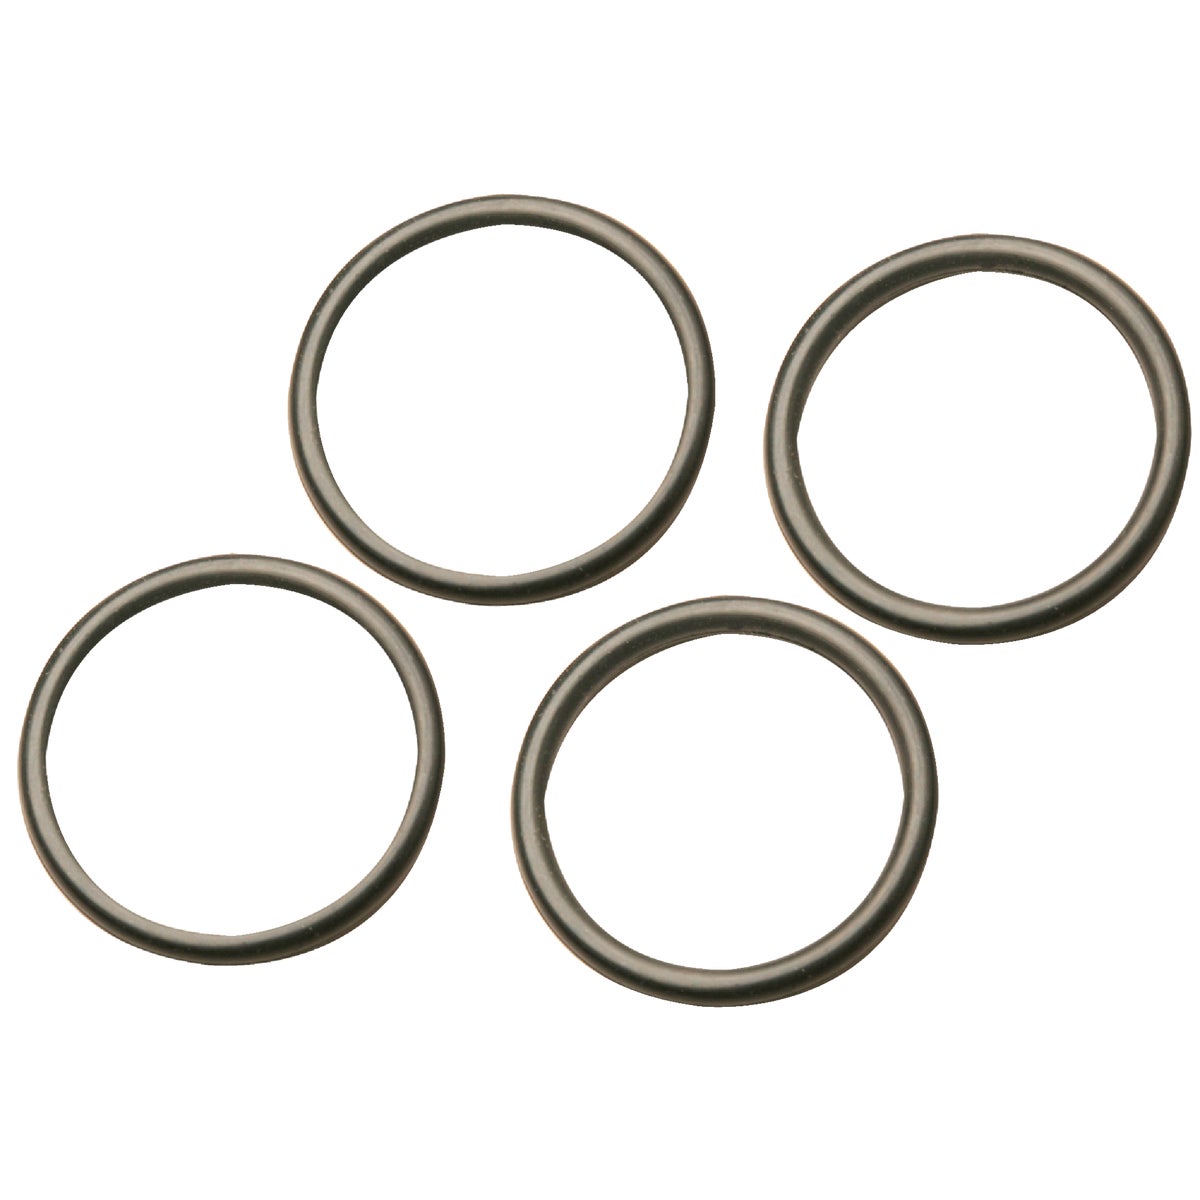 Do it O-Ring Kit For Delta and Peerless Faucets (4-Piece)